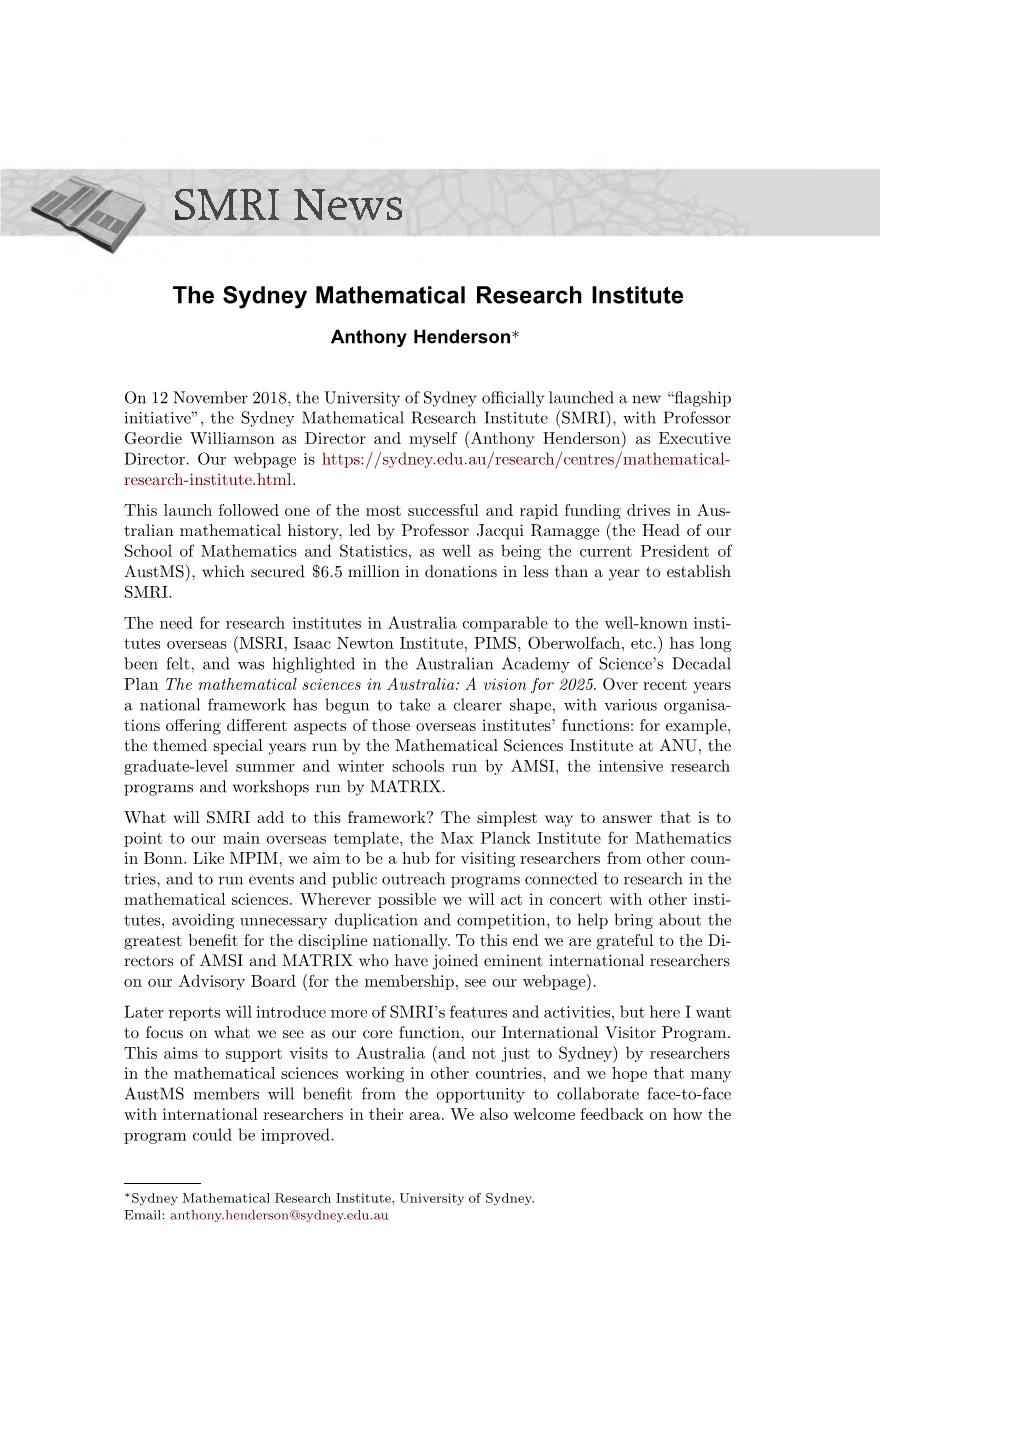 The Sydney Mathematical Research Institute